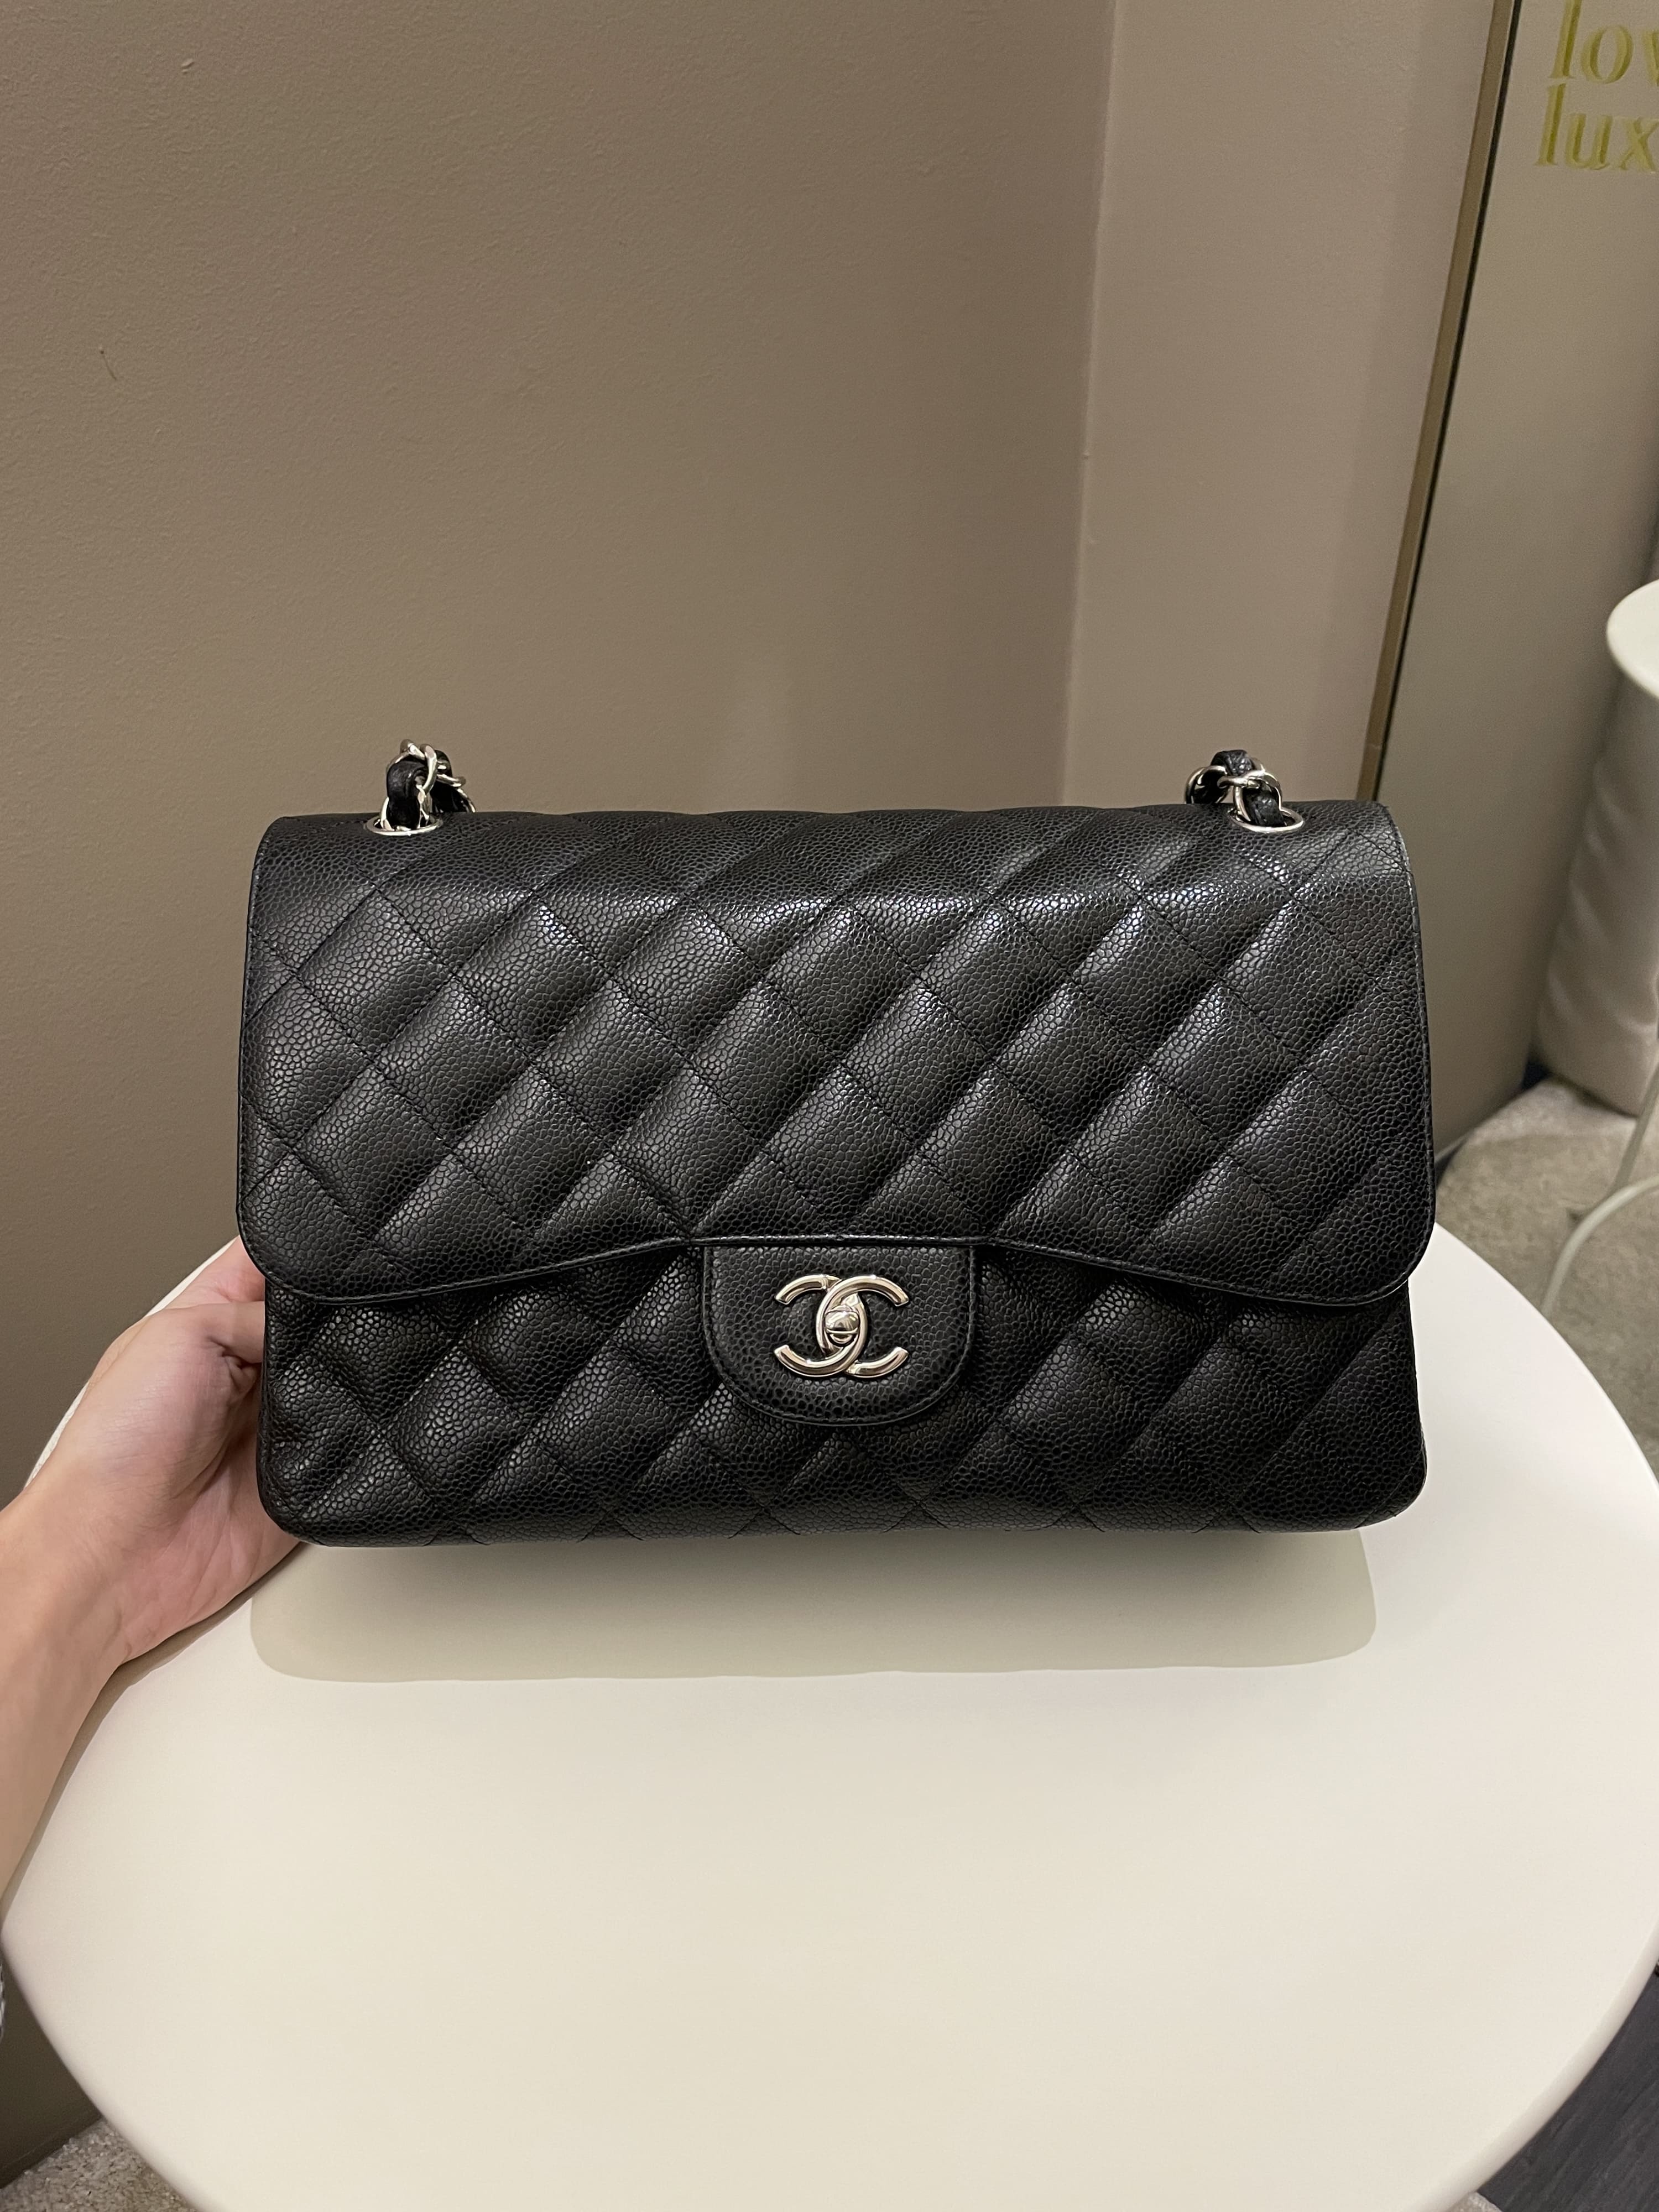 Chanel Classic Jumbo Double Flap Quilted Caviar Leather Shoulder Bag Black